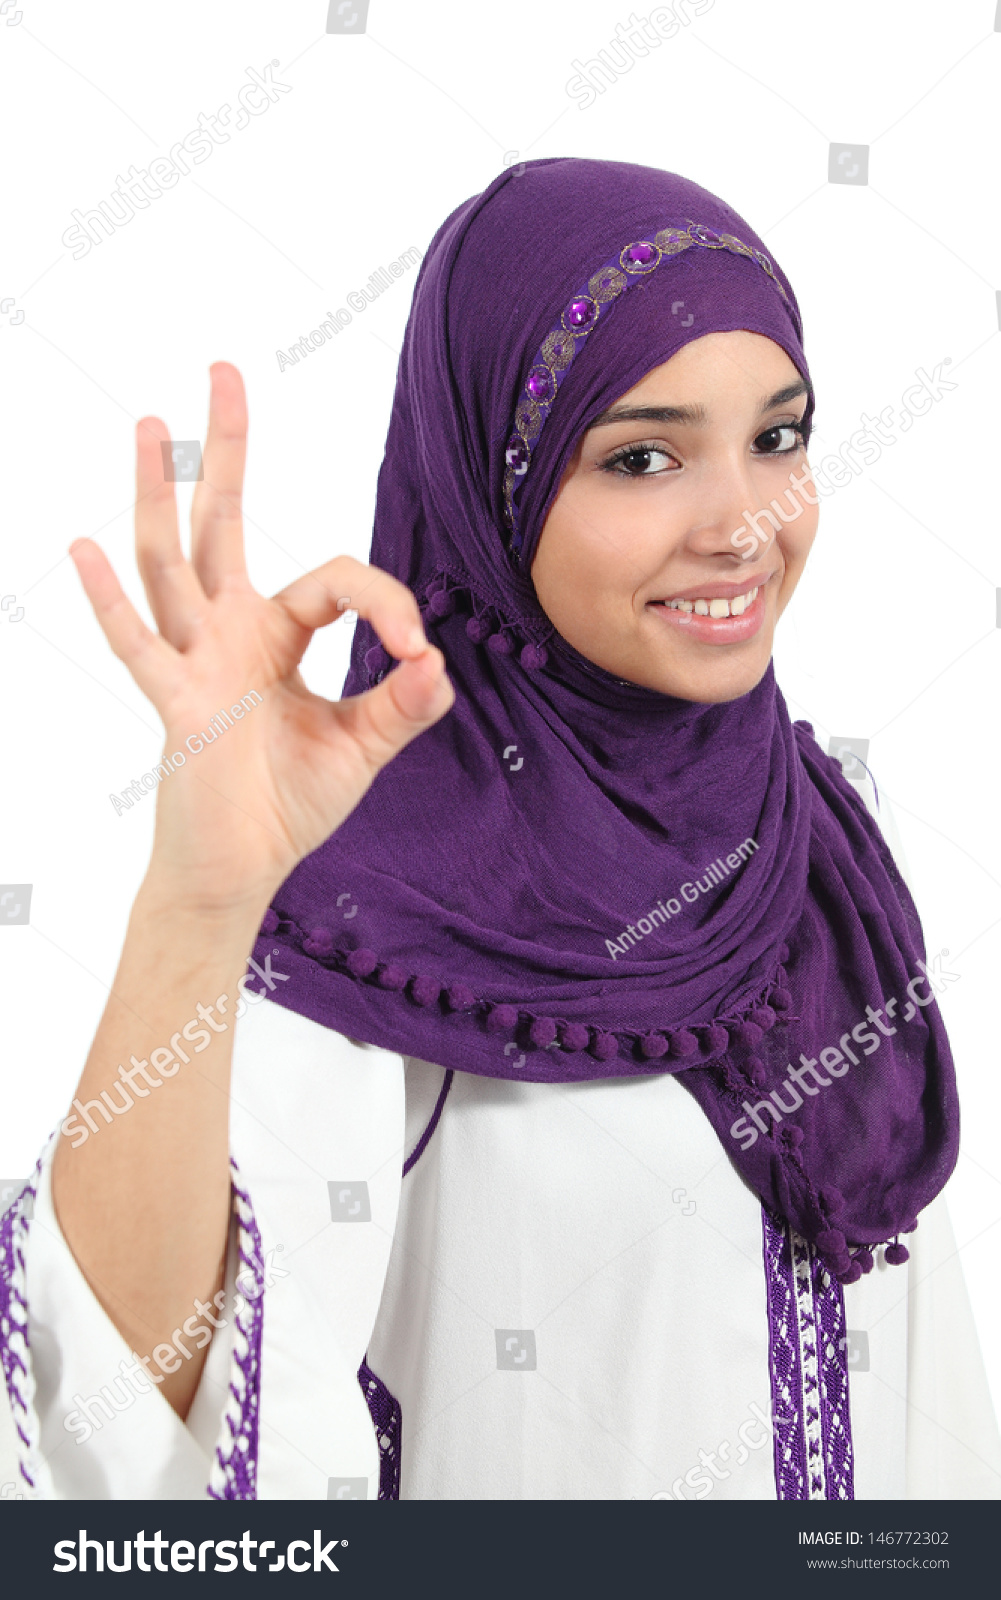 Image result for happy muslim